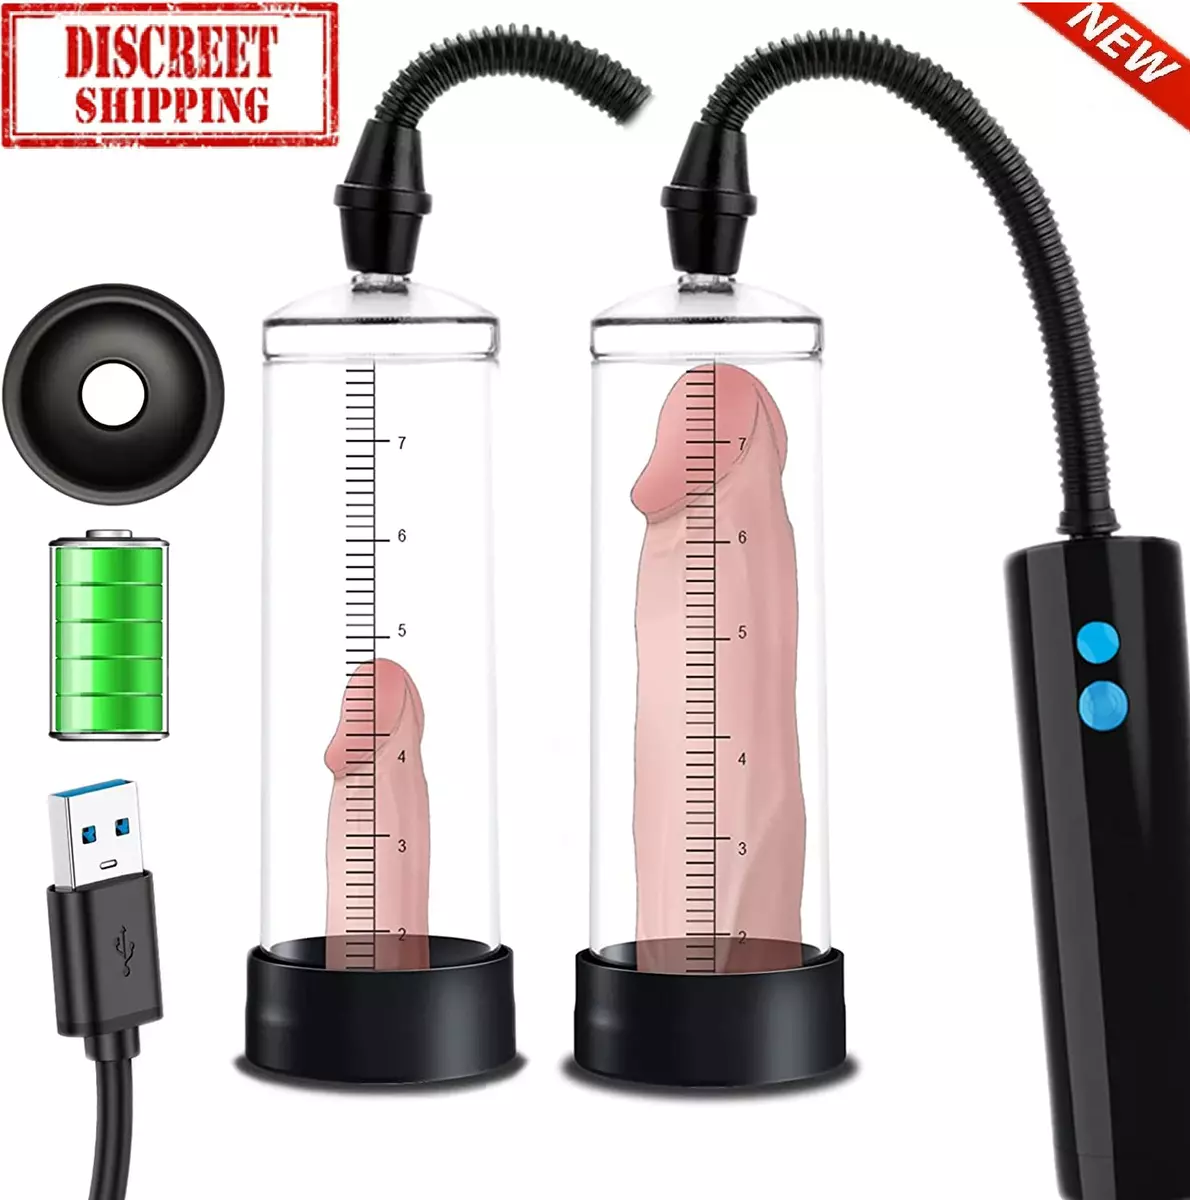 donovan jeffery recommends how to make a home made penis pump pic